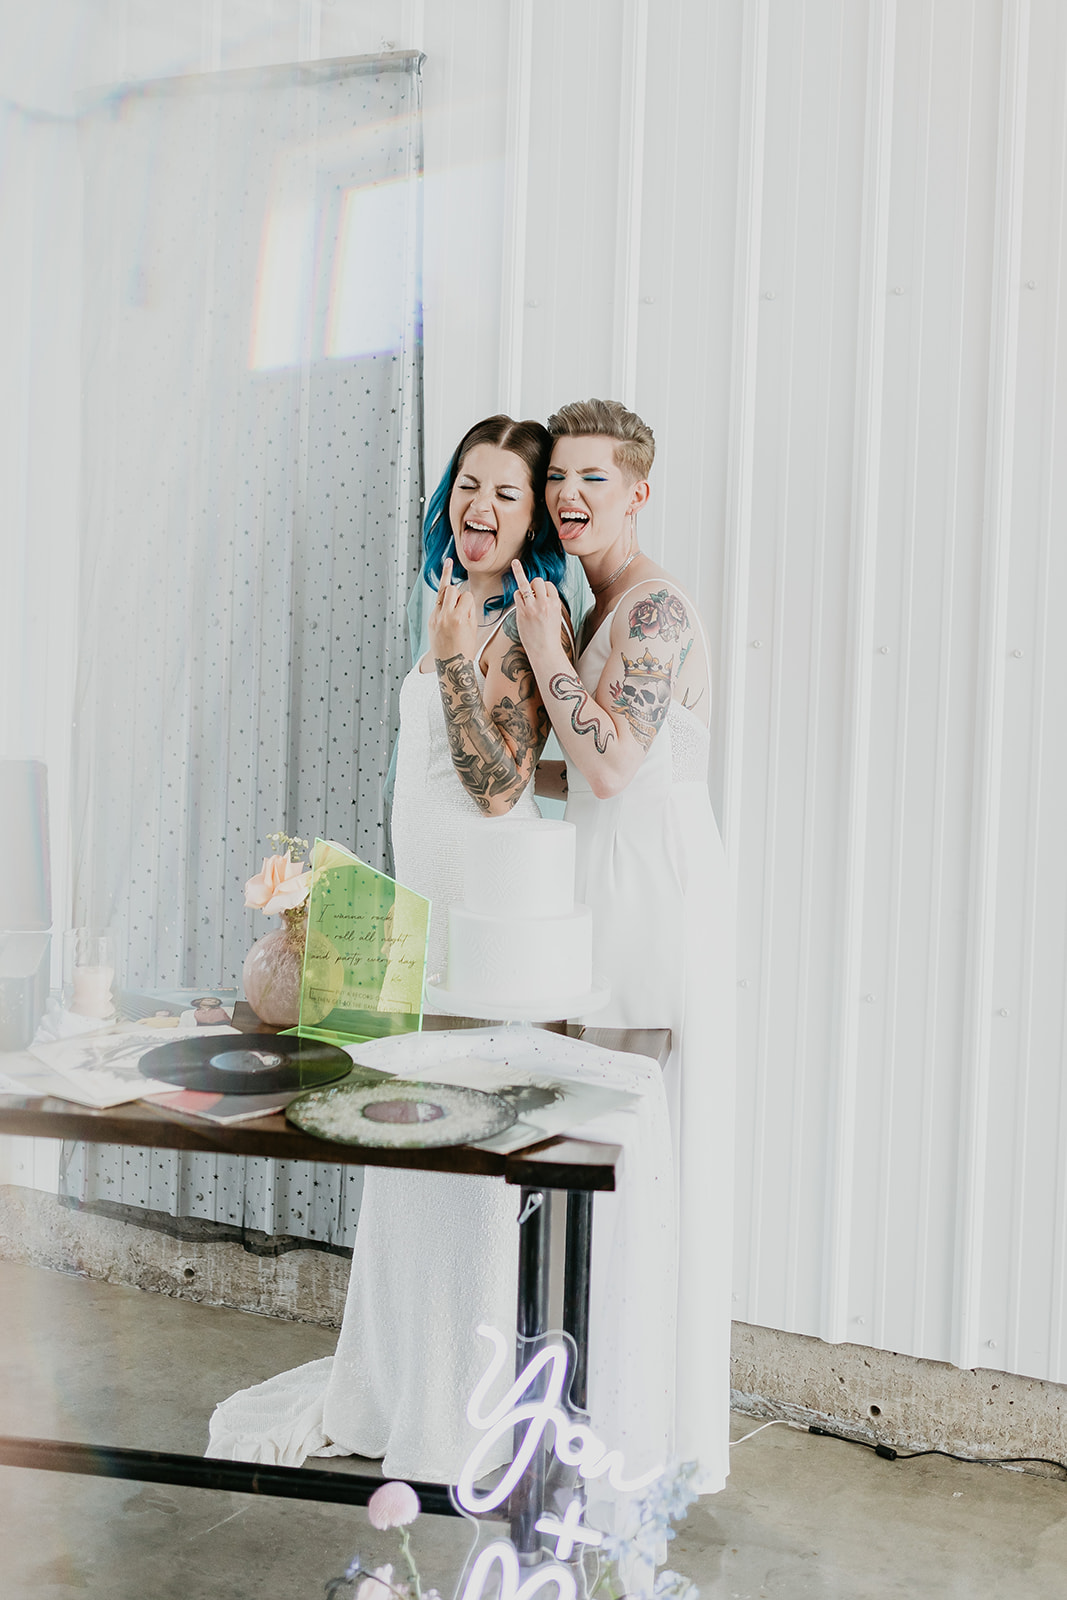 Rocker chic brides with their holographic wedding inspiration decor